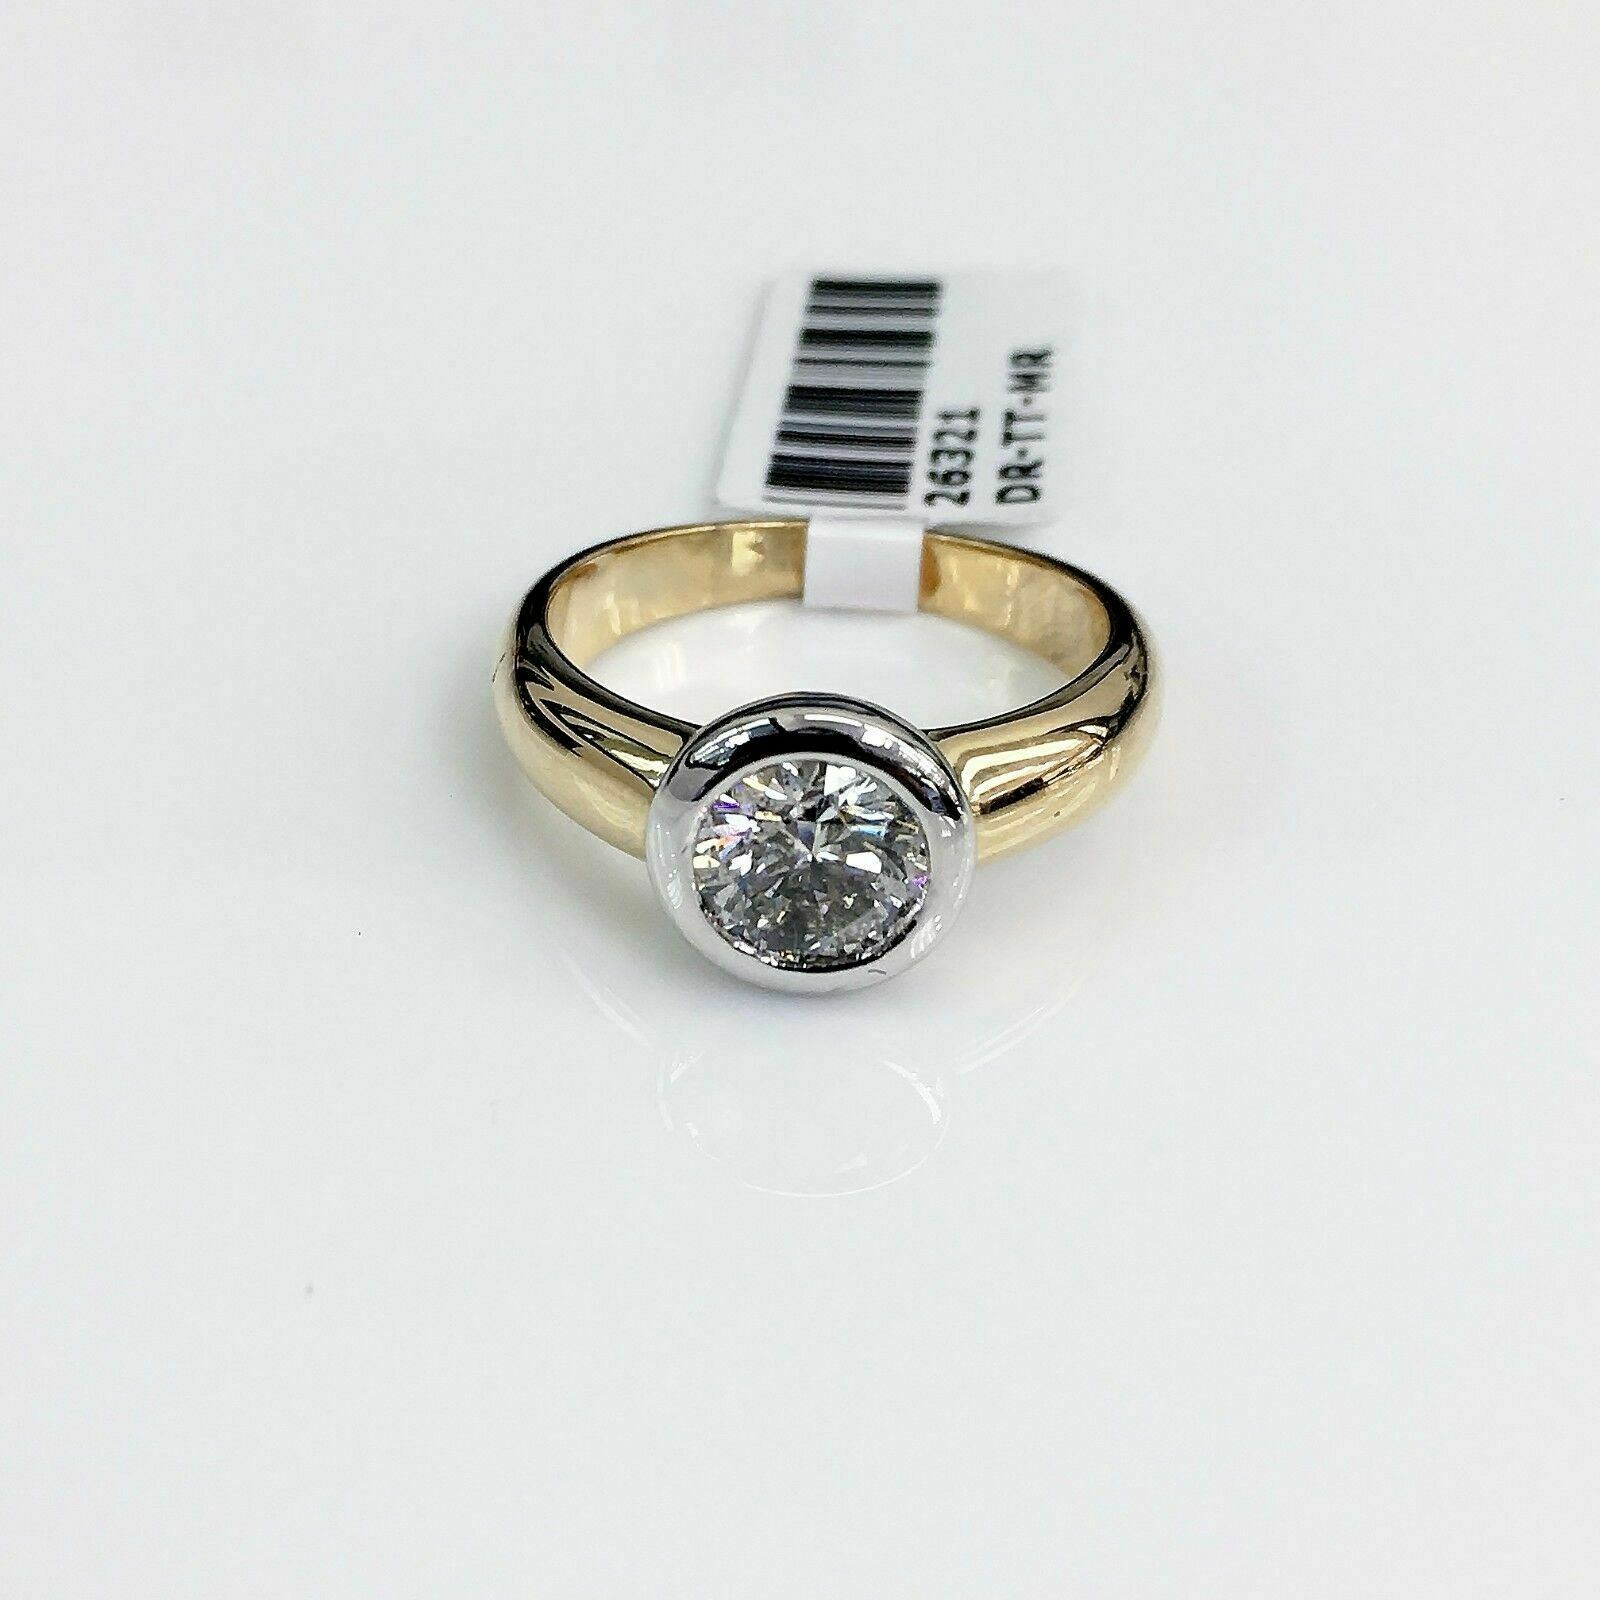 1.06 Carats Round Diamond Solitaire Wedding/Engagement Ring 14K 2 tone Gold